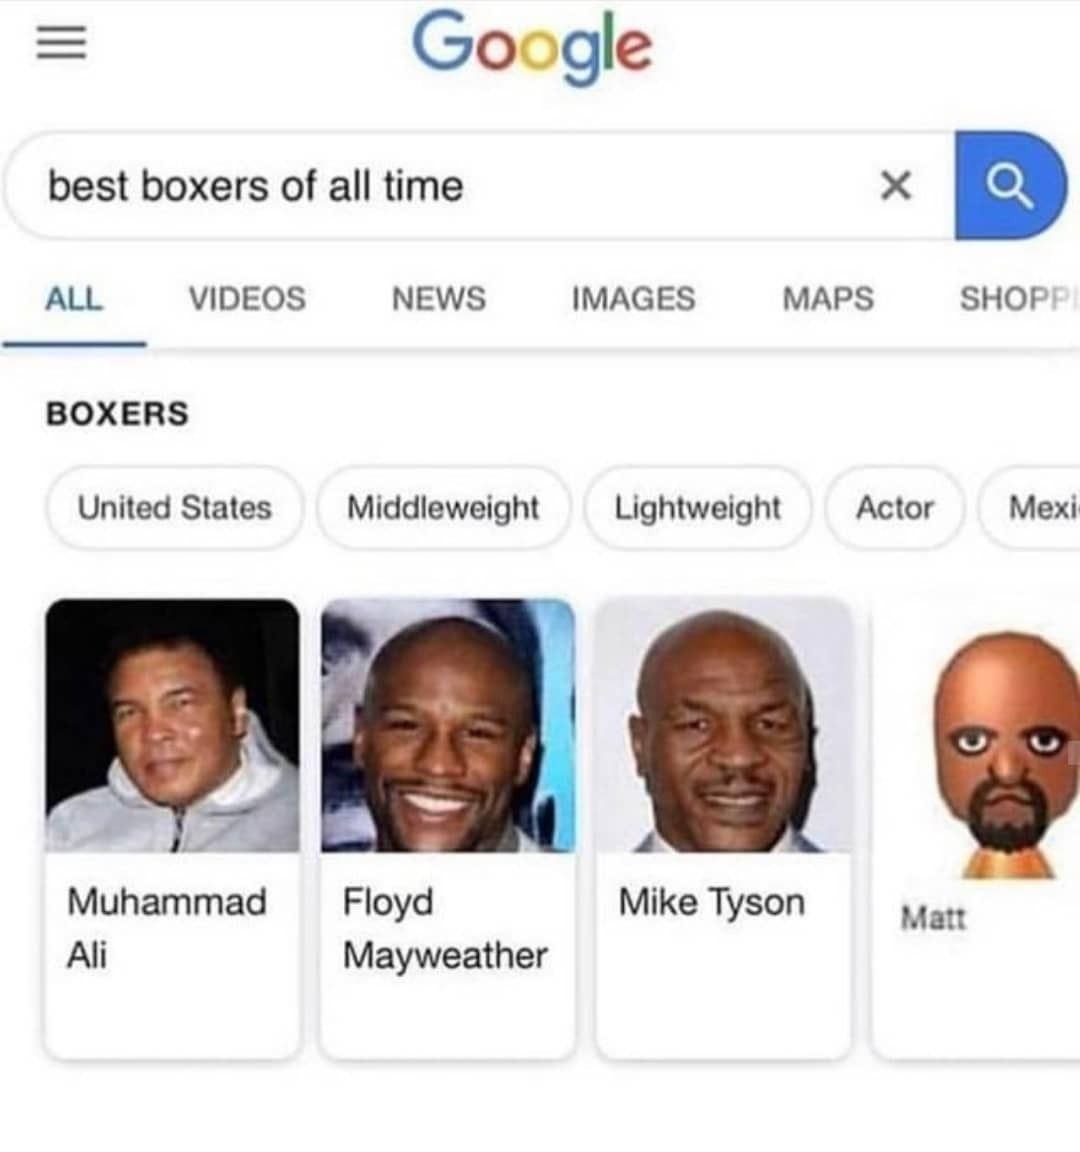 famous boxers and the Mii Matt from Wii sports.